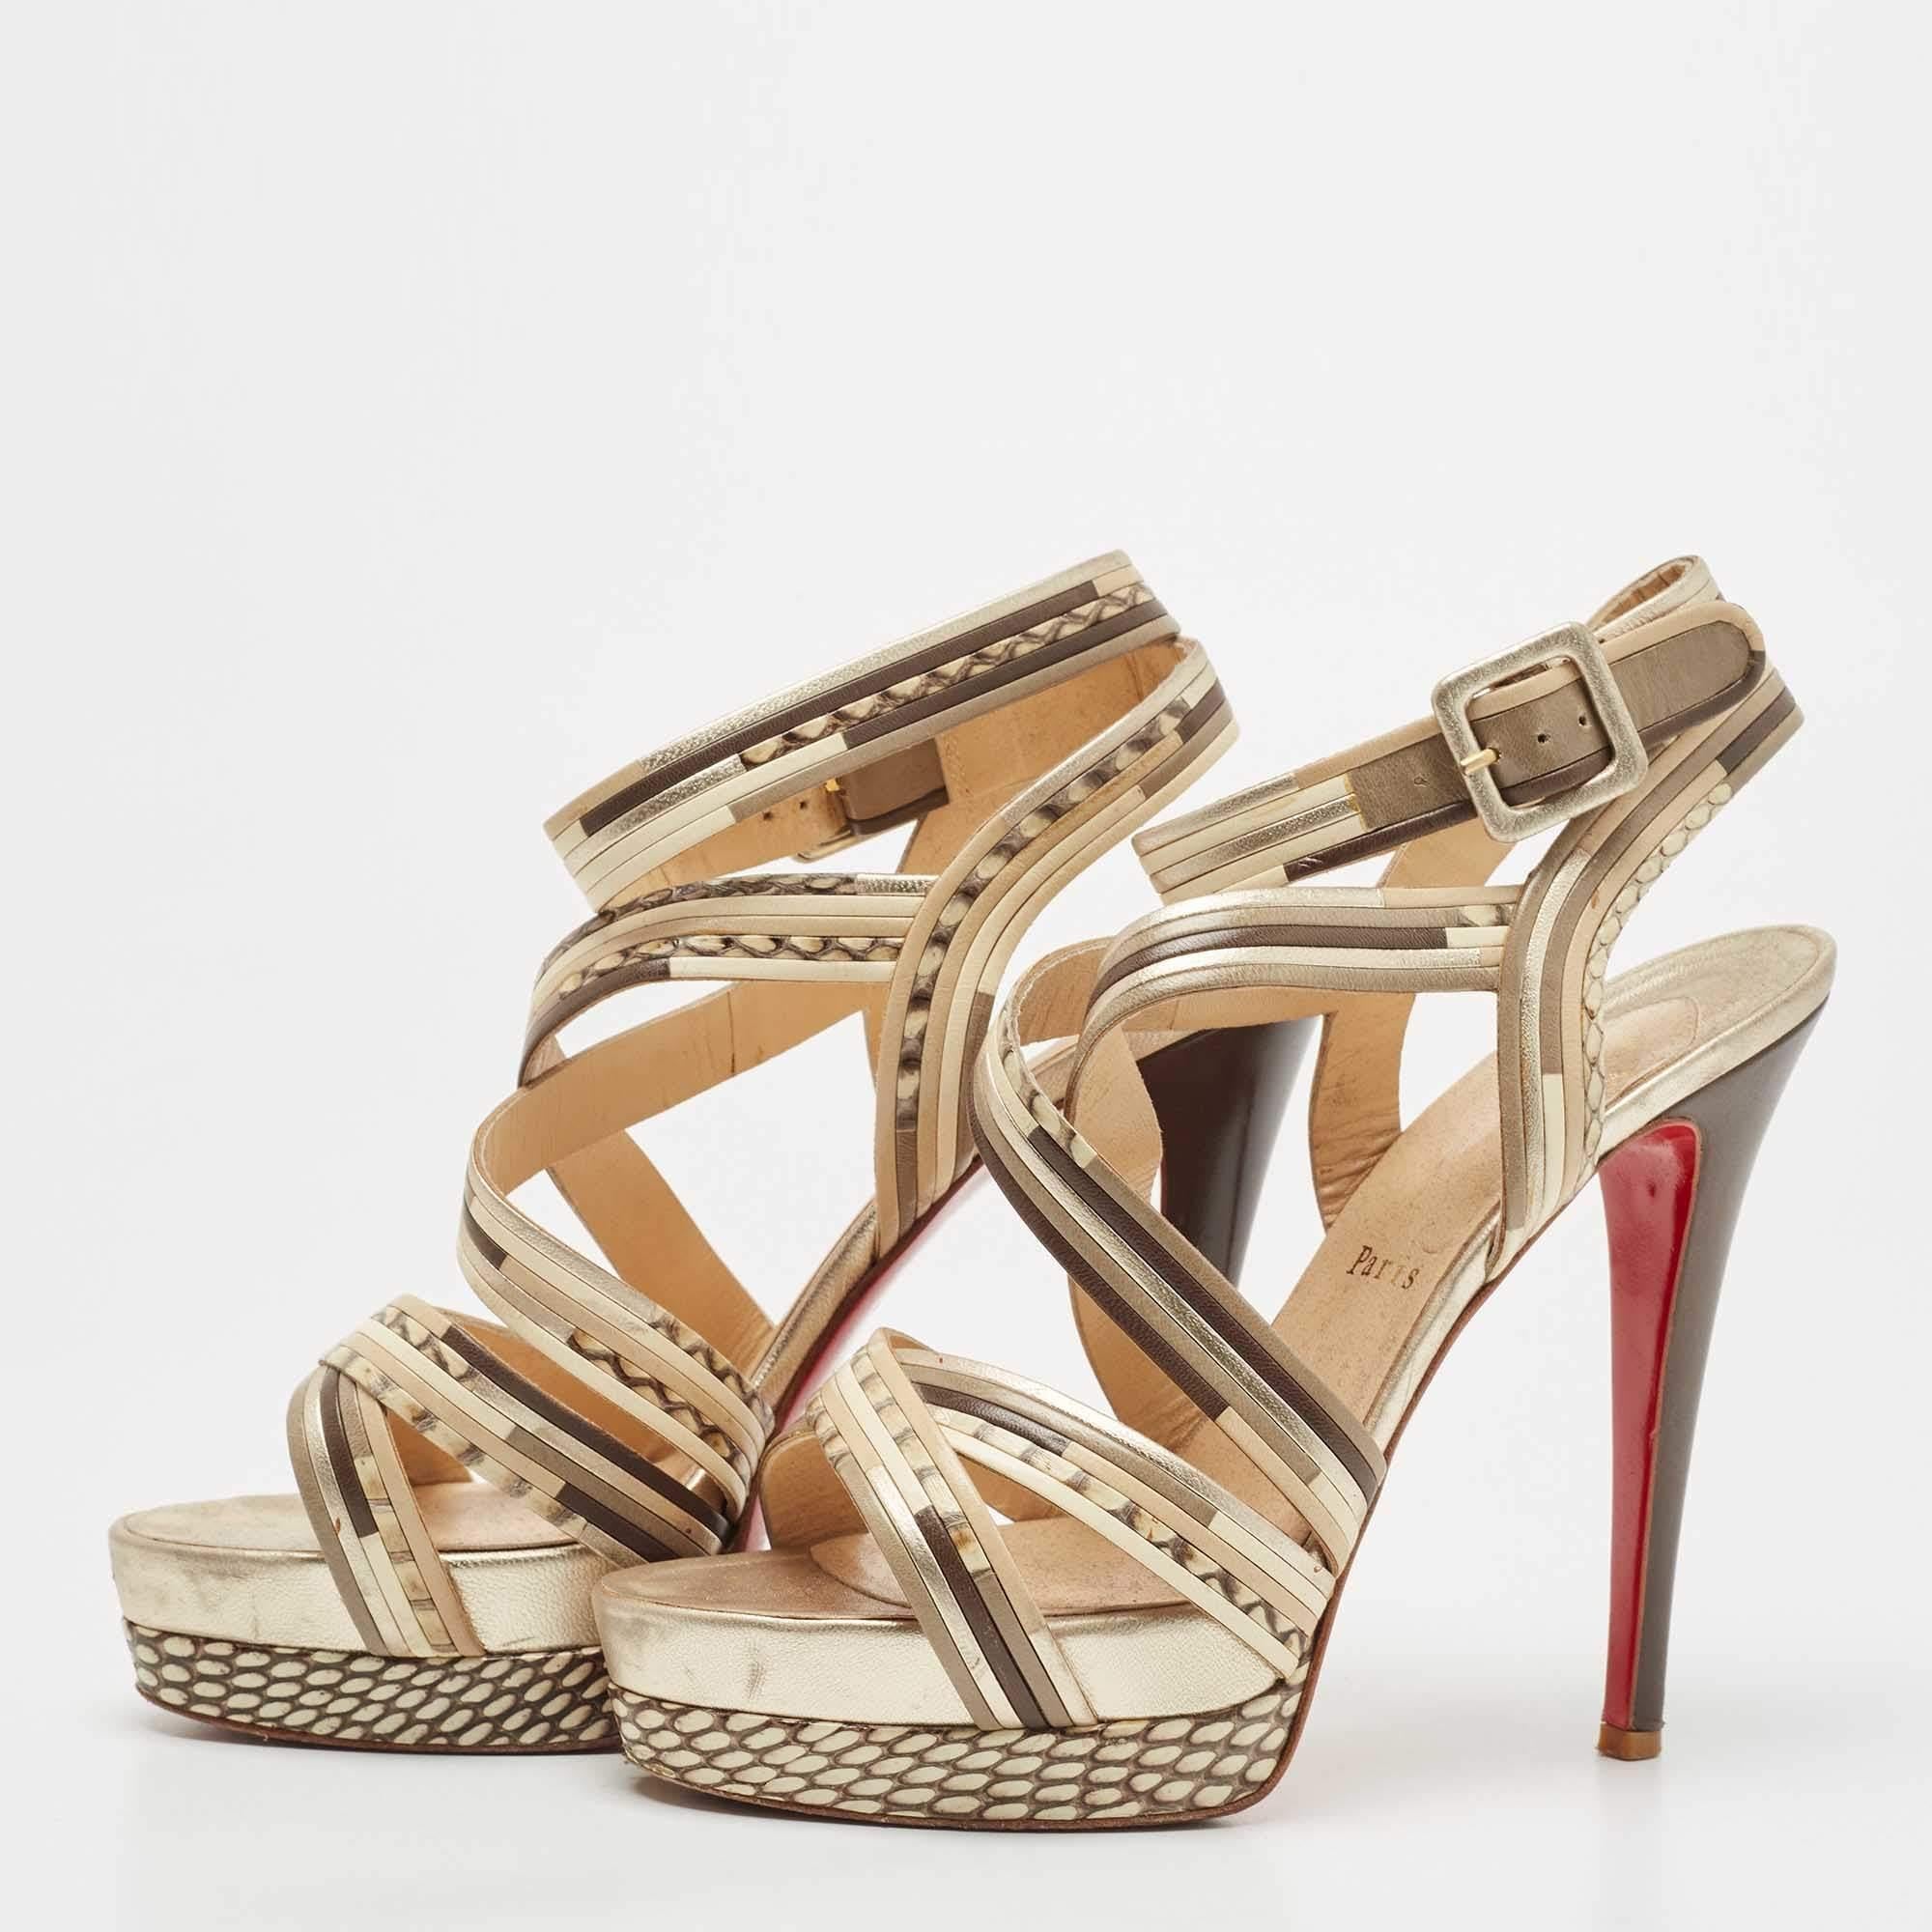 Christian Louboutin Brown/Beige Leather Strappy Platform Sandals Size 38.5 1